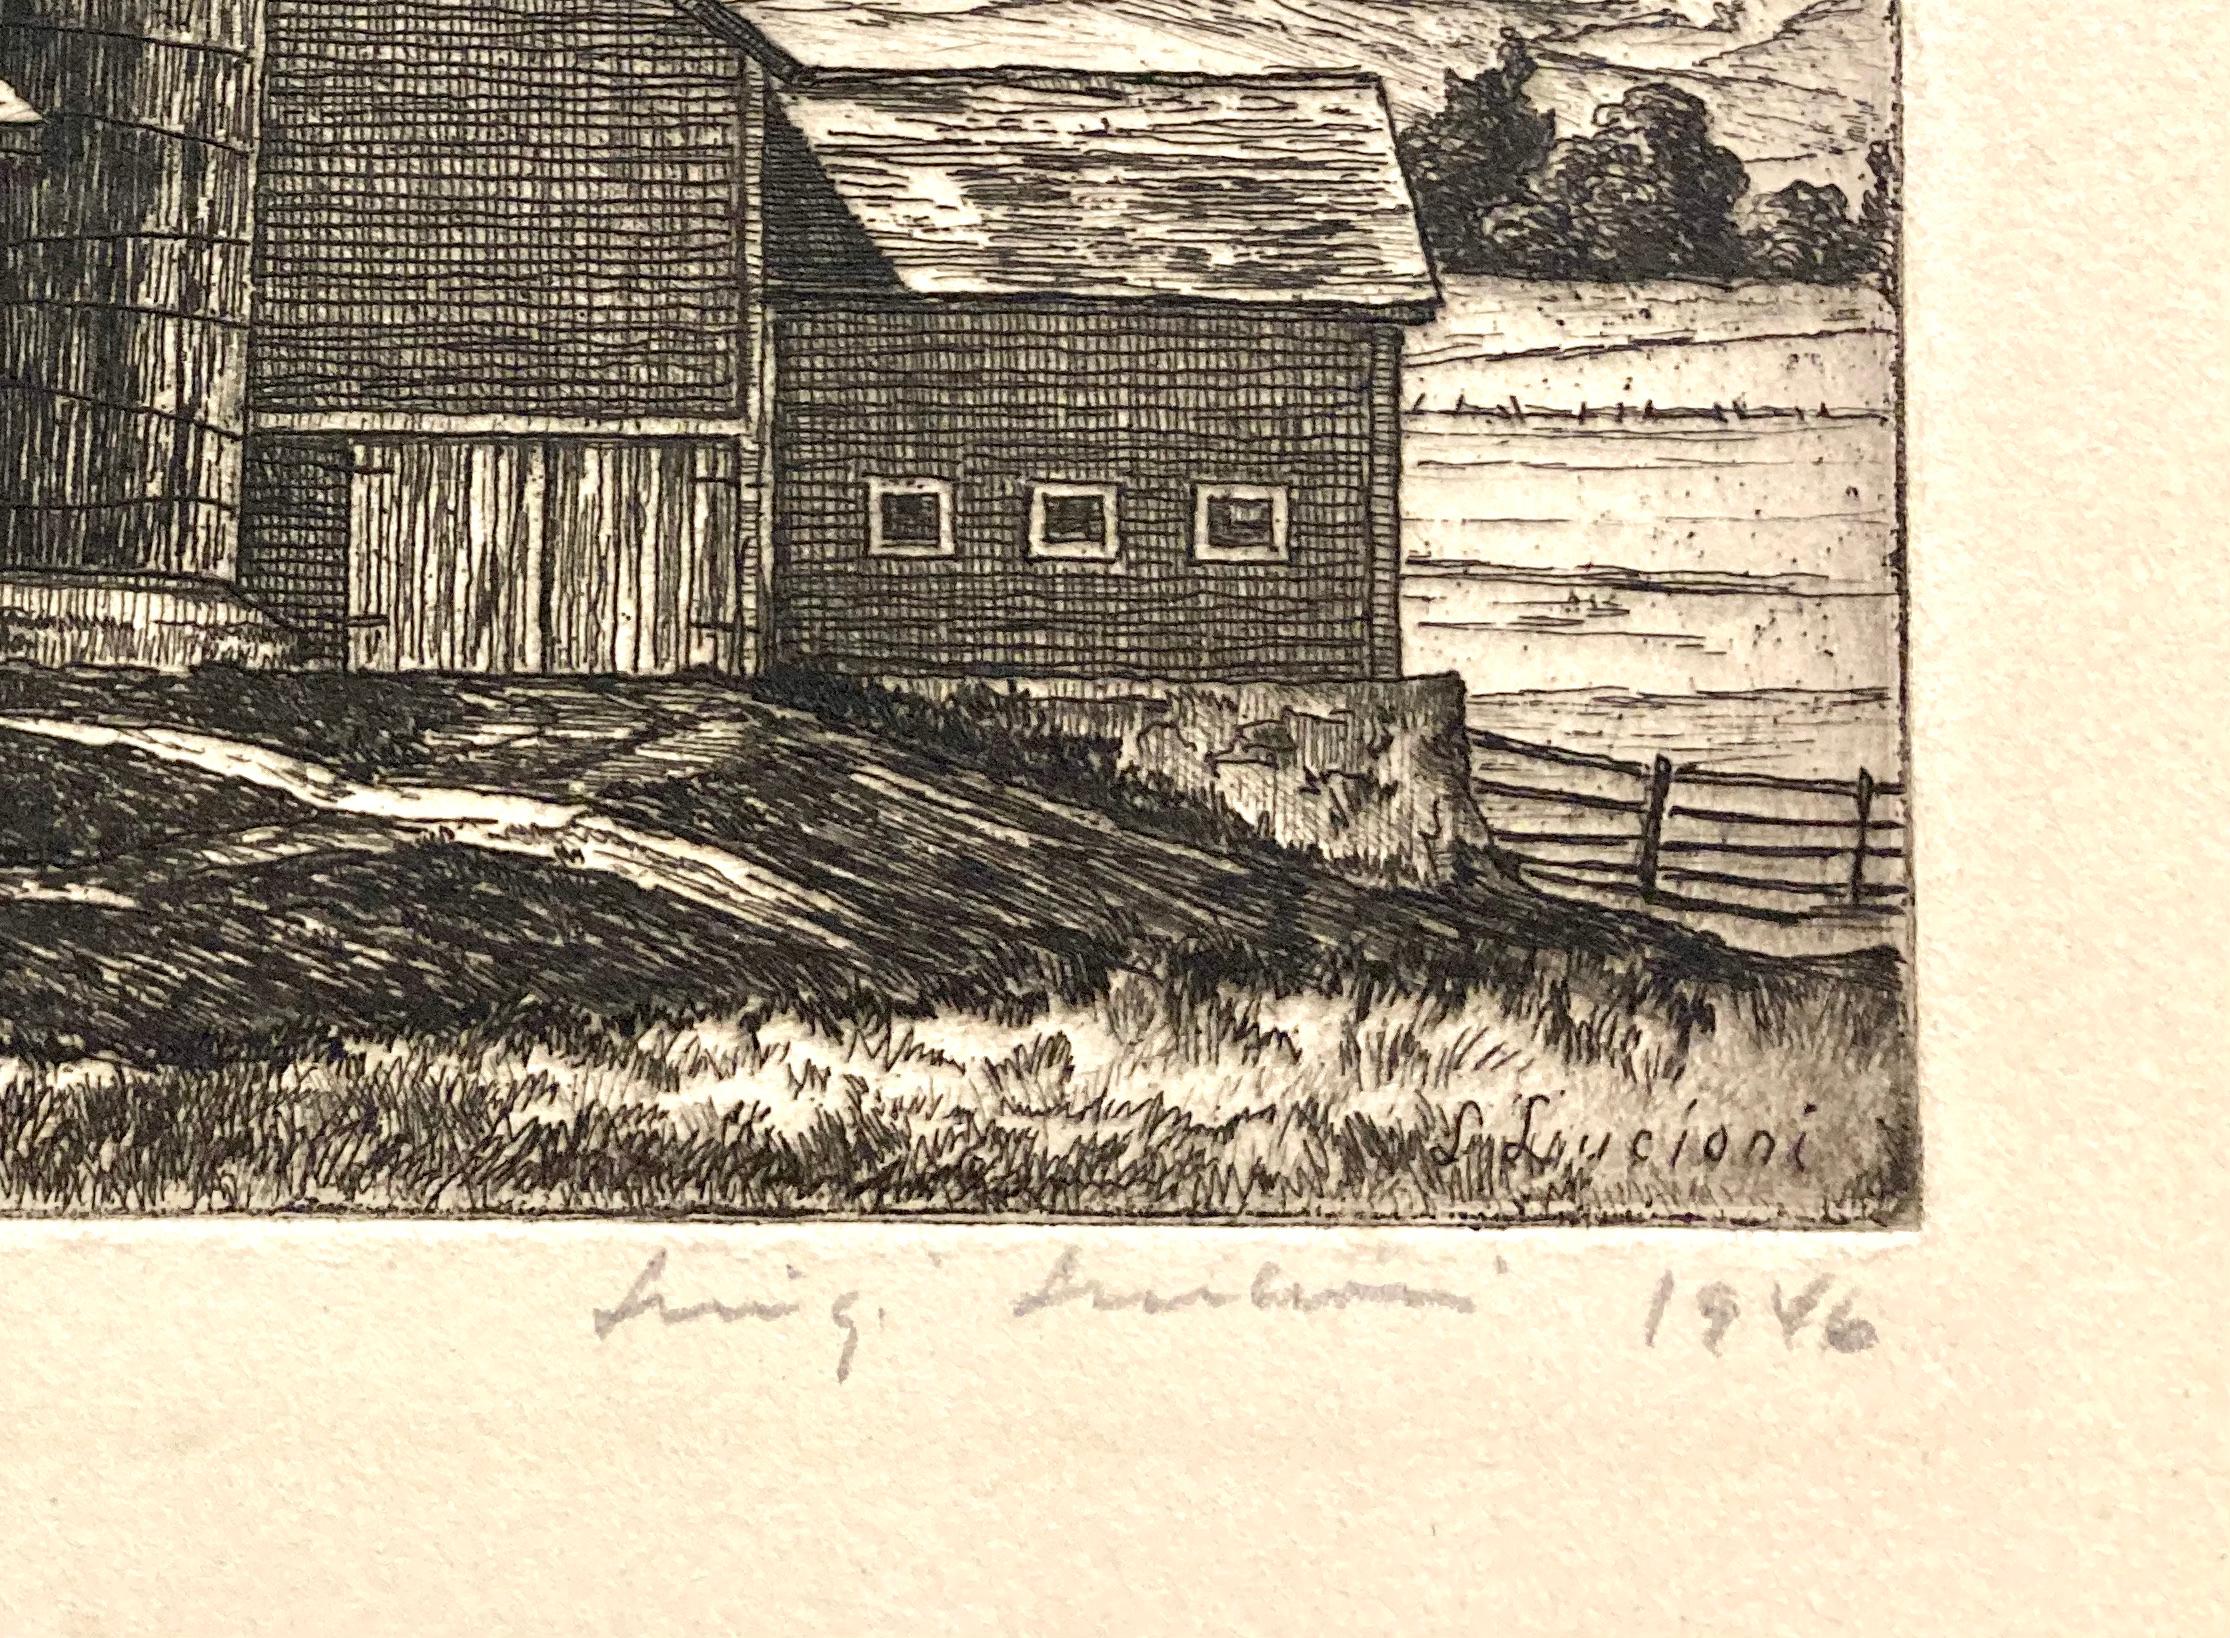 Painter and printmaker, Luigi Lucioni was known for his portraits, still life paintings, and landscapes of Vermont and Italy. This 'New England Barn' is a particularly early subject and scarcer and most of his prints.
It is signed and dated in